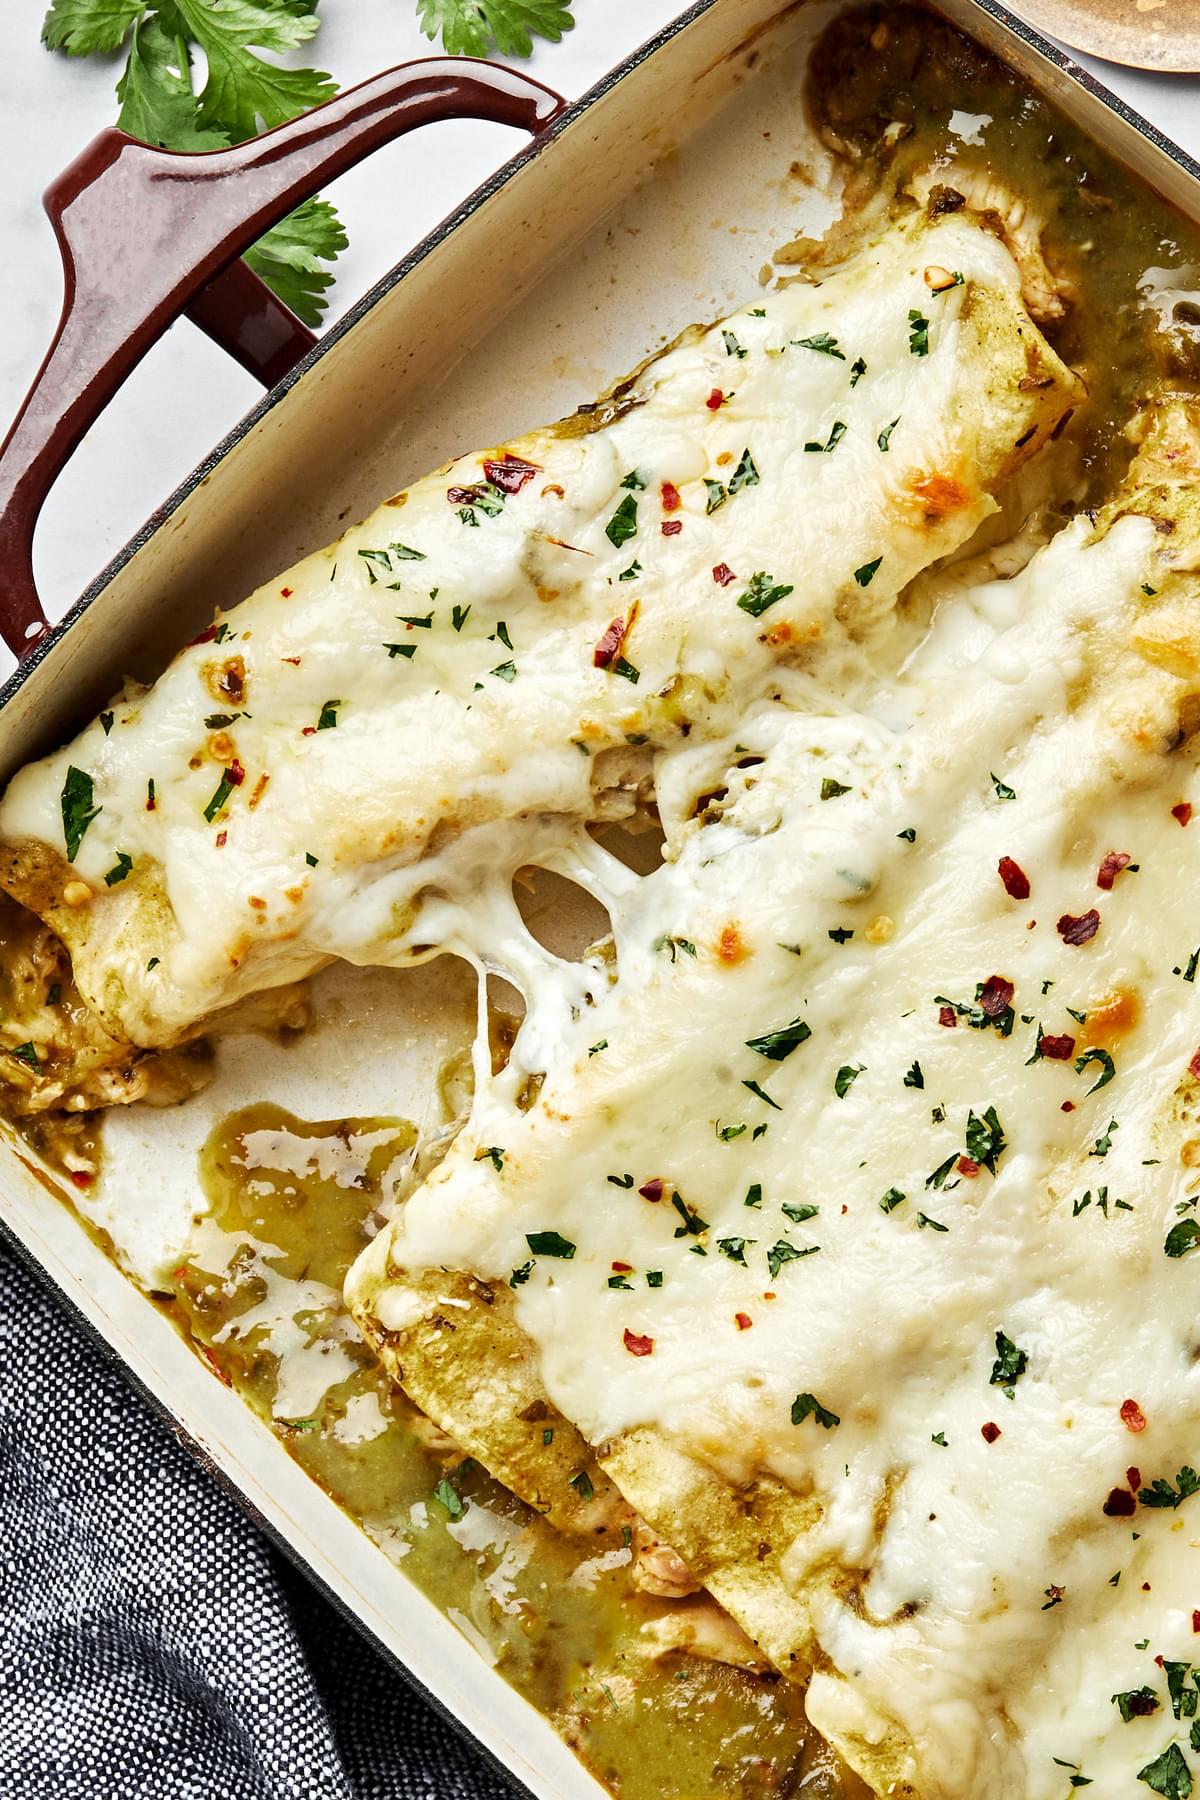 homemade green chicken enchiladas in a casserole dish made with chicken, cheese, sour cream and taco seasoning